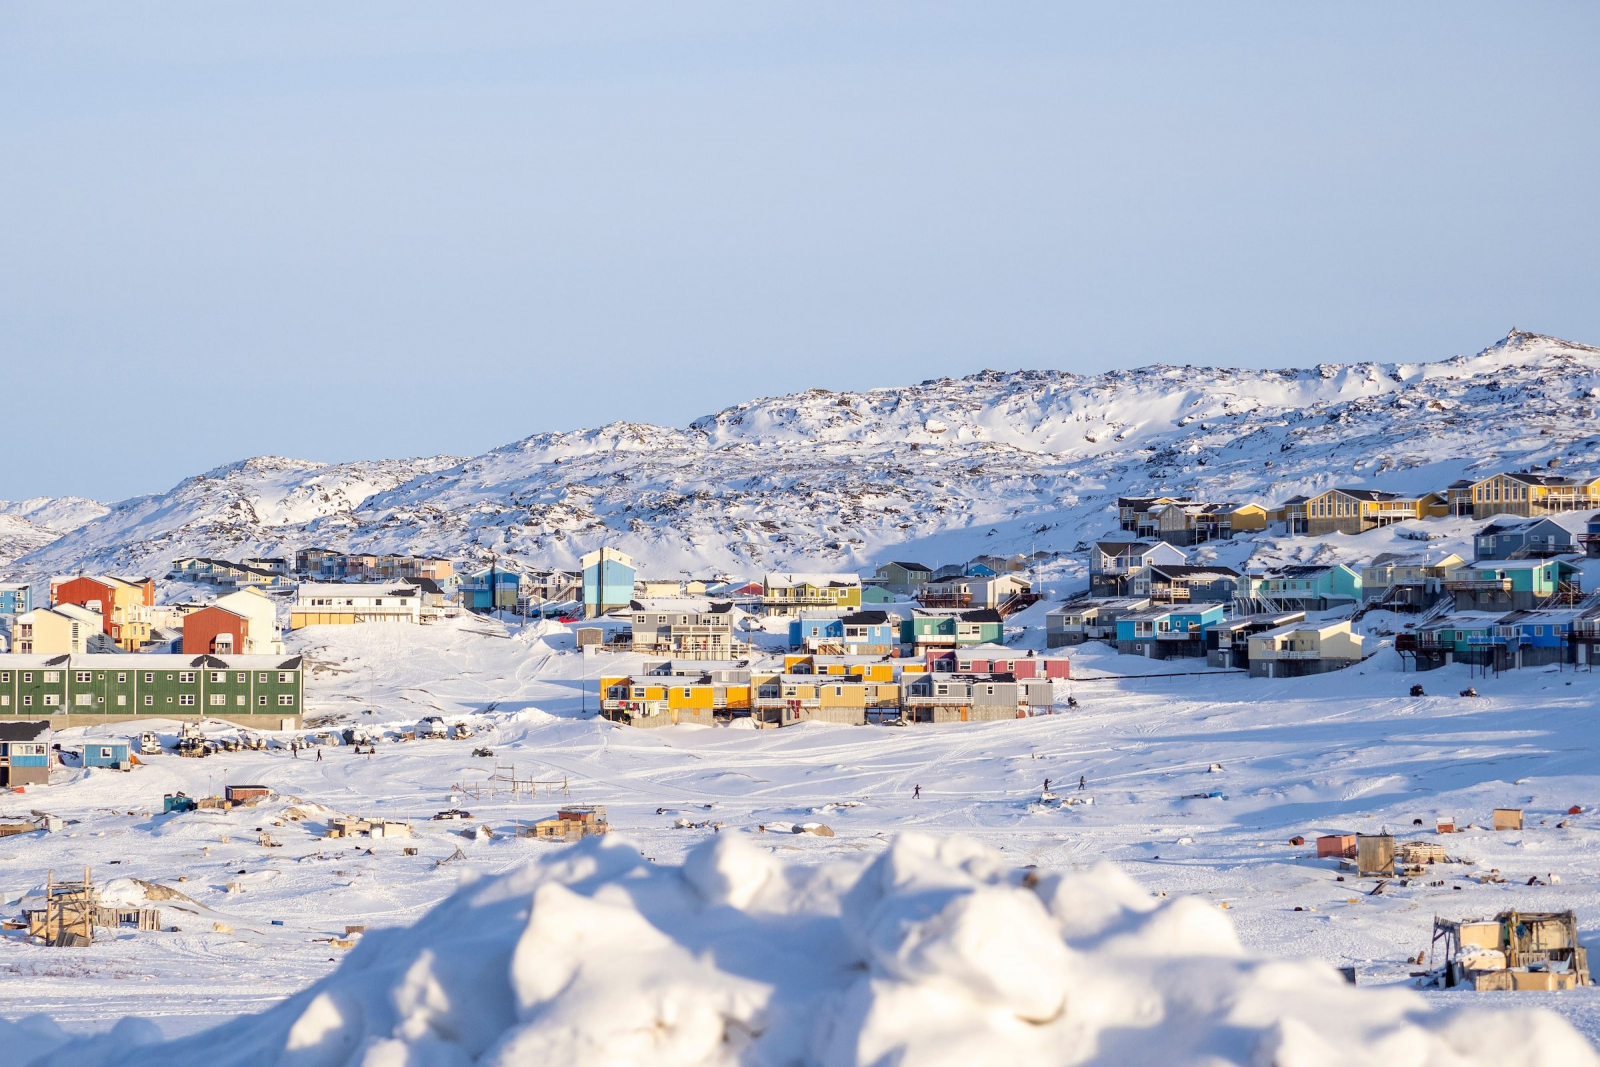 View from a Hill onto Ilulissat and the frozen fjord. Photo - Lisa M. Burns, Visit Greenland